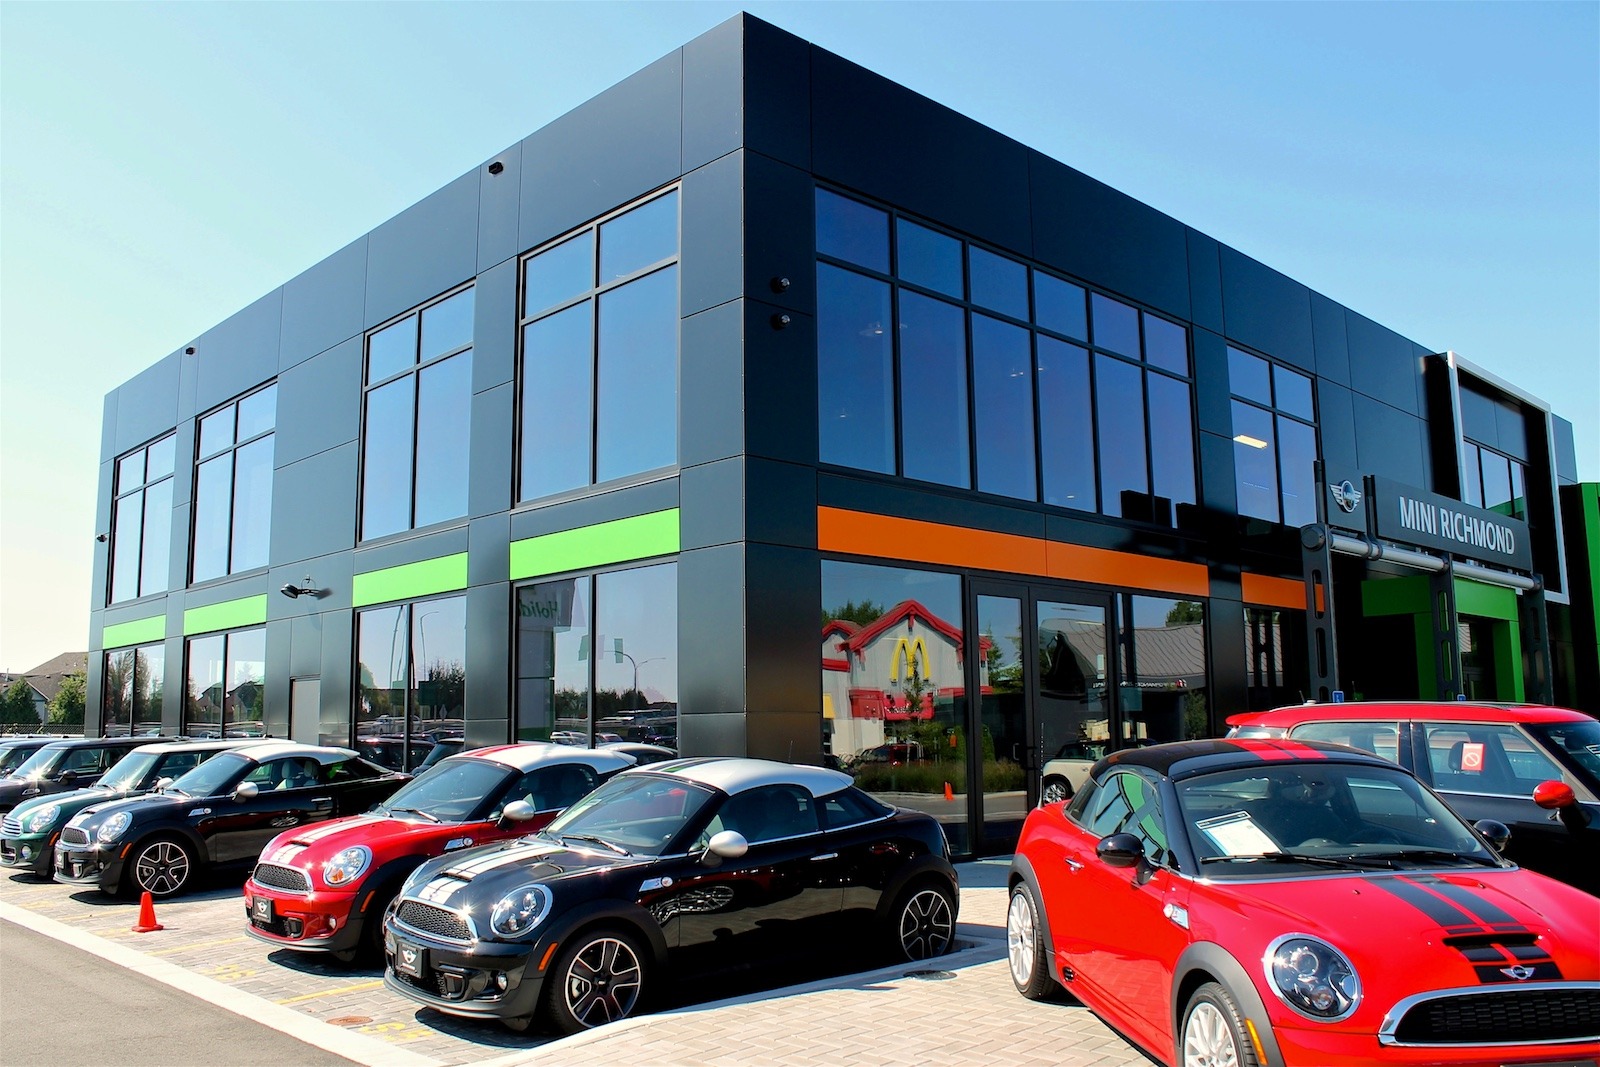 Robertson-Walls-Ceilings-Completed-Projects-Luxury-Car-Dealerships-Mini-Richmond-5 MINI RICHMOND